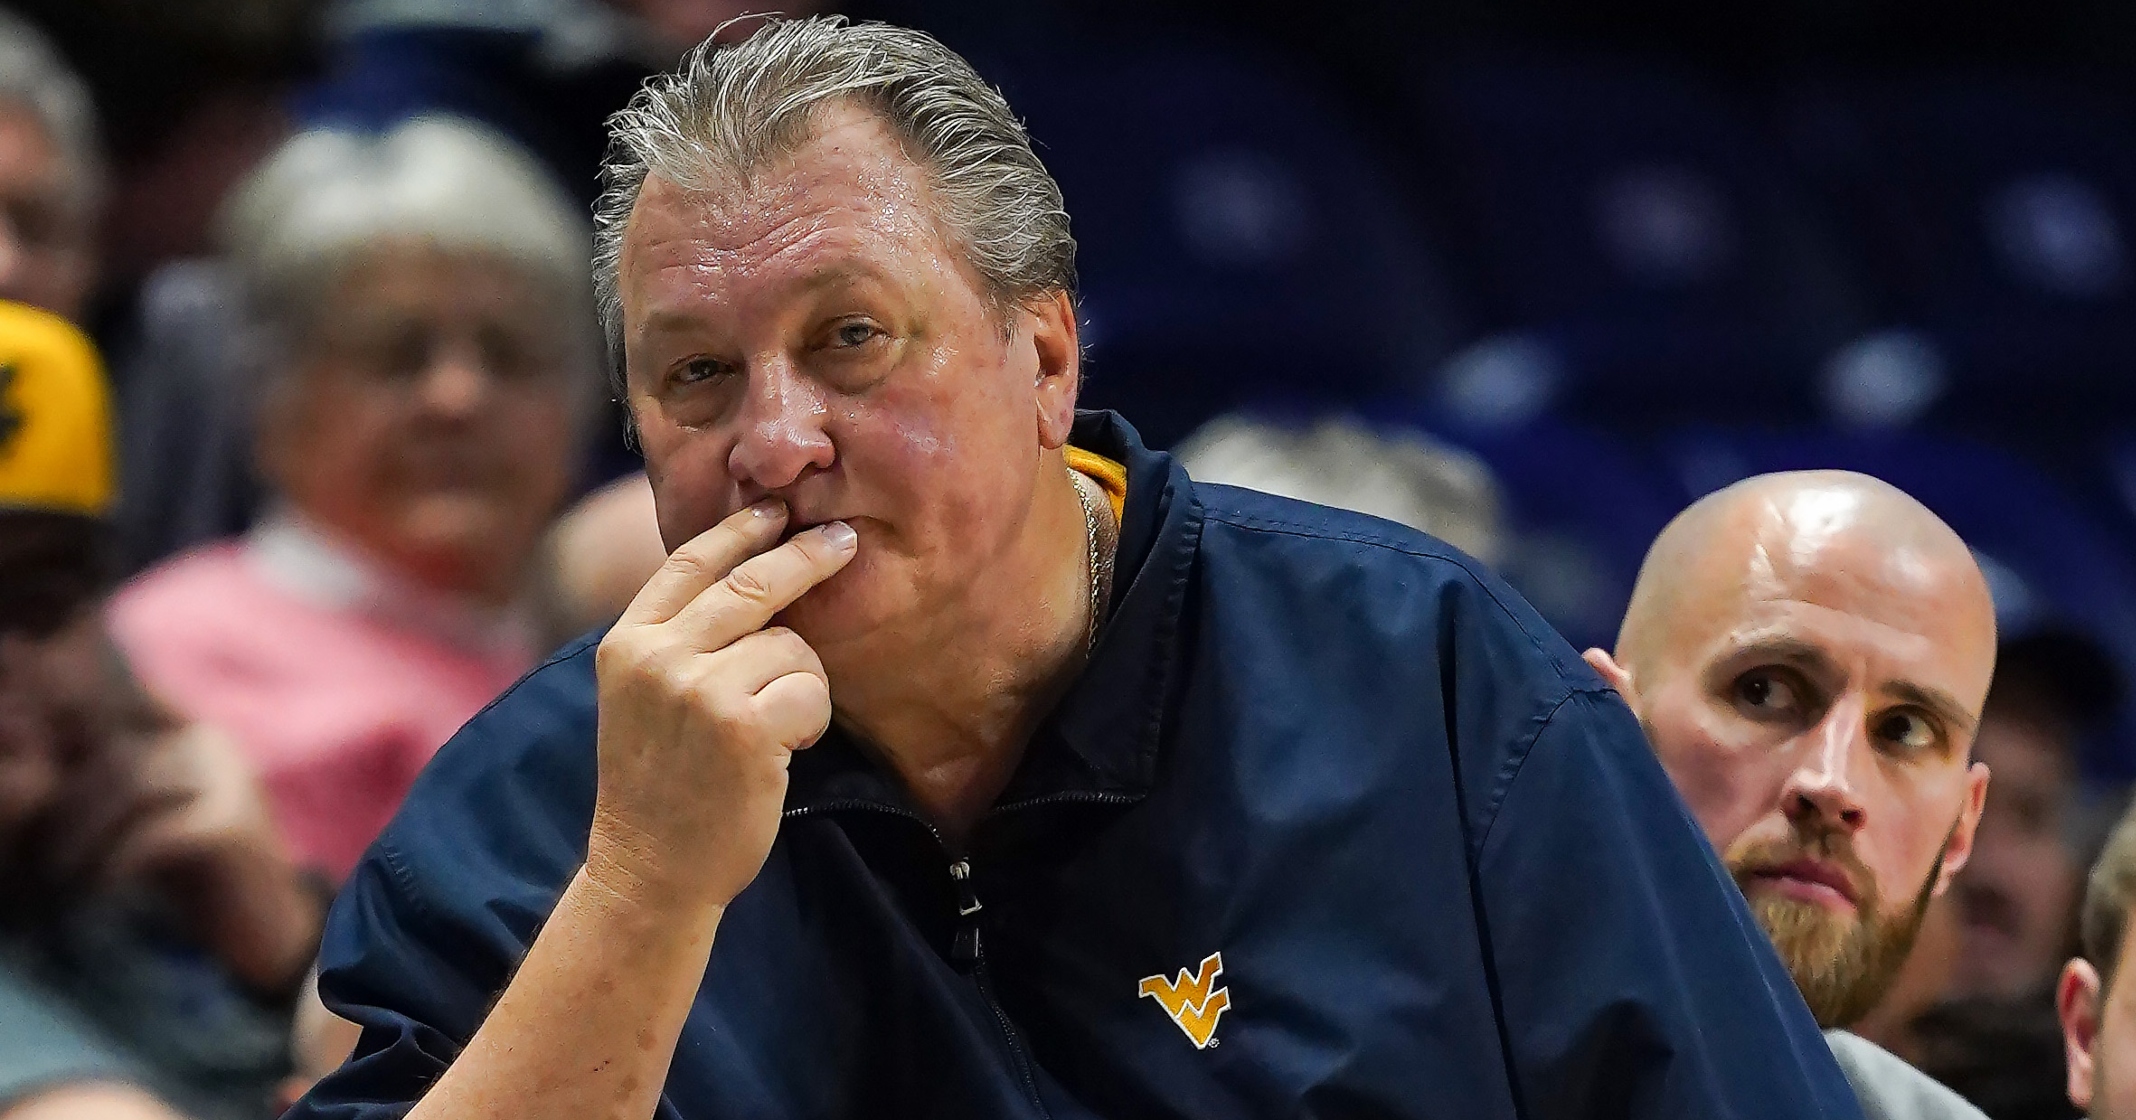 West Virginia on Bob Huggins use of homophobic slur: The situation is under review